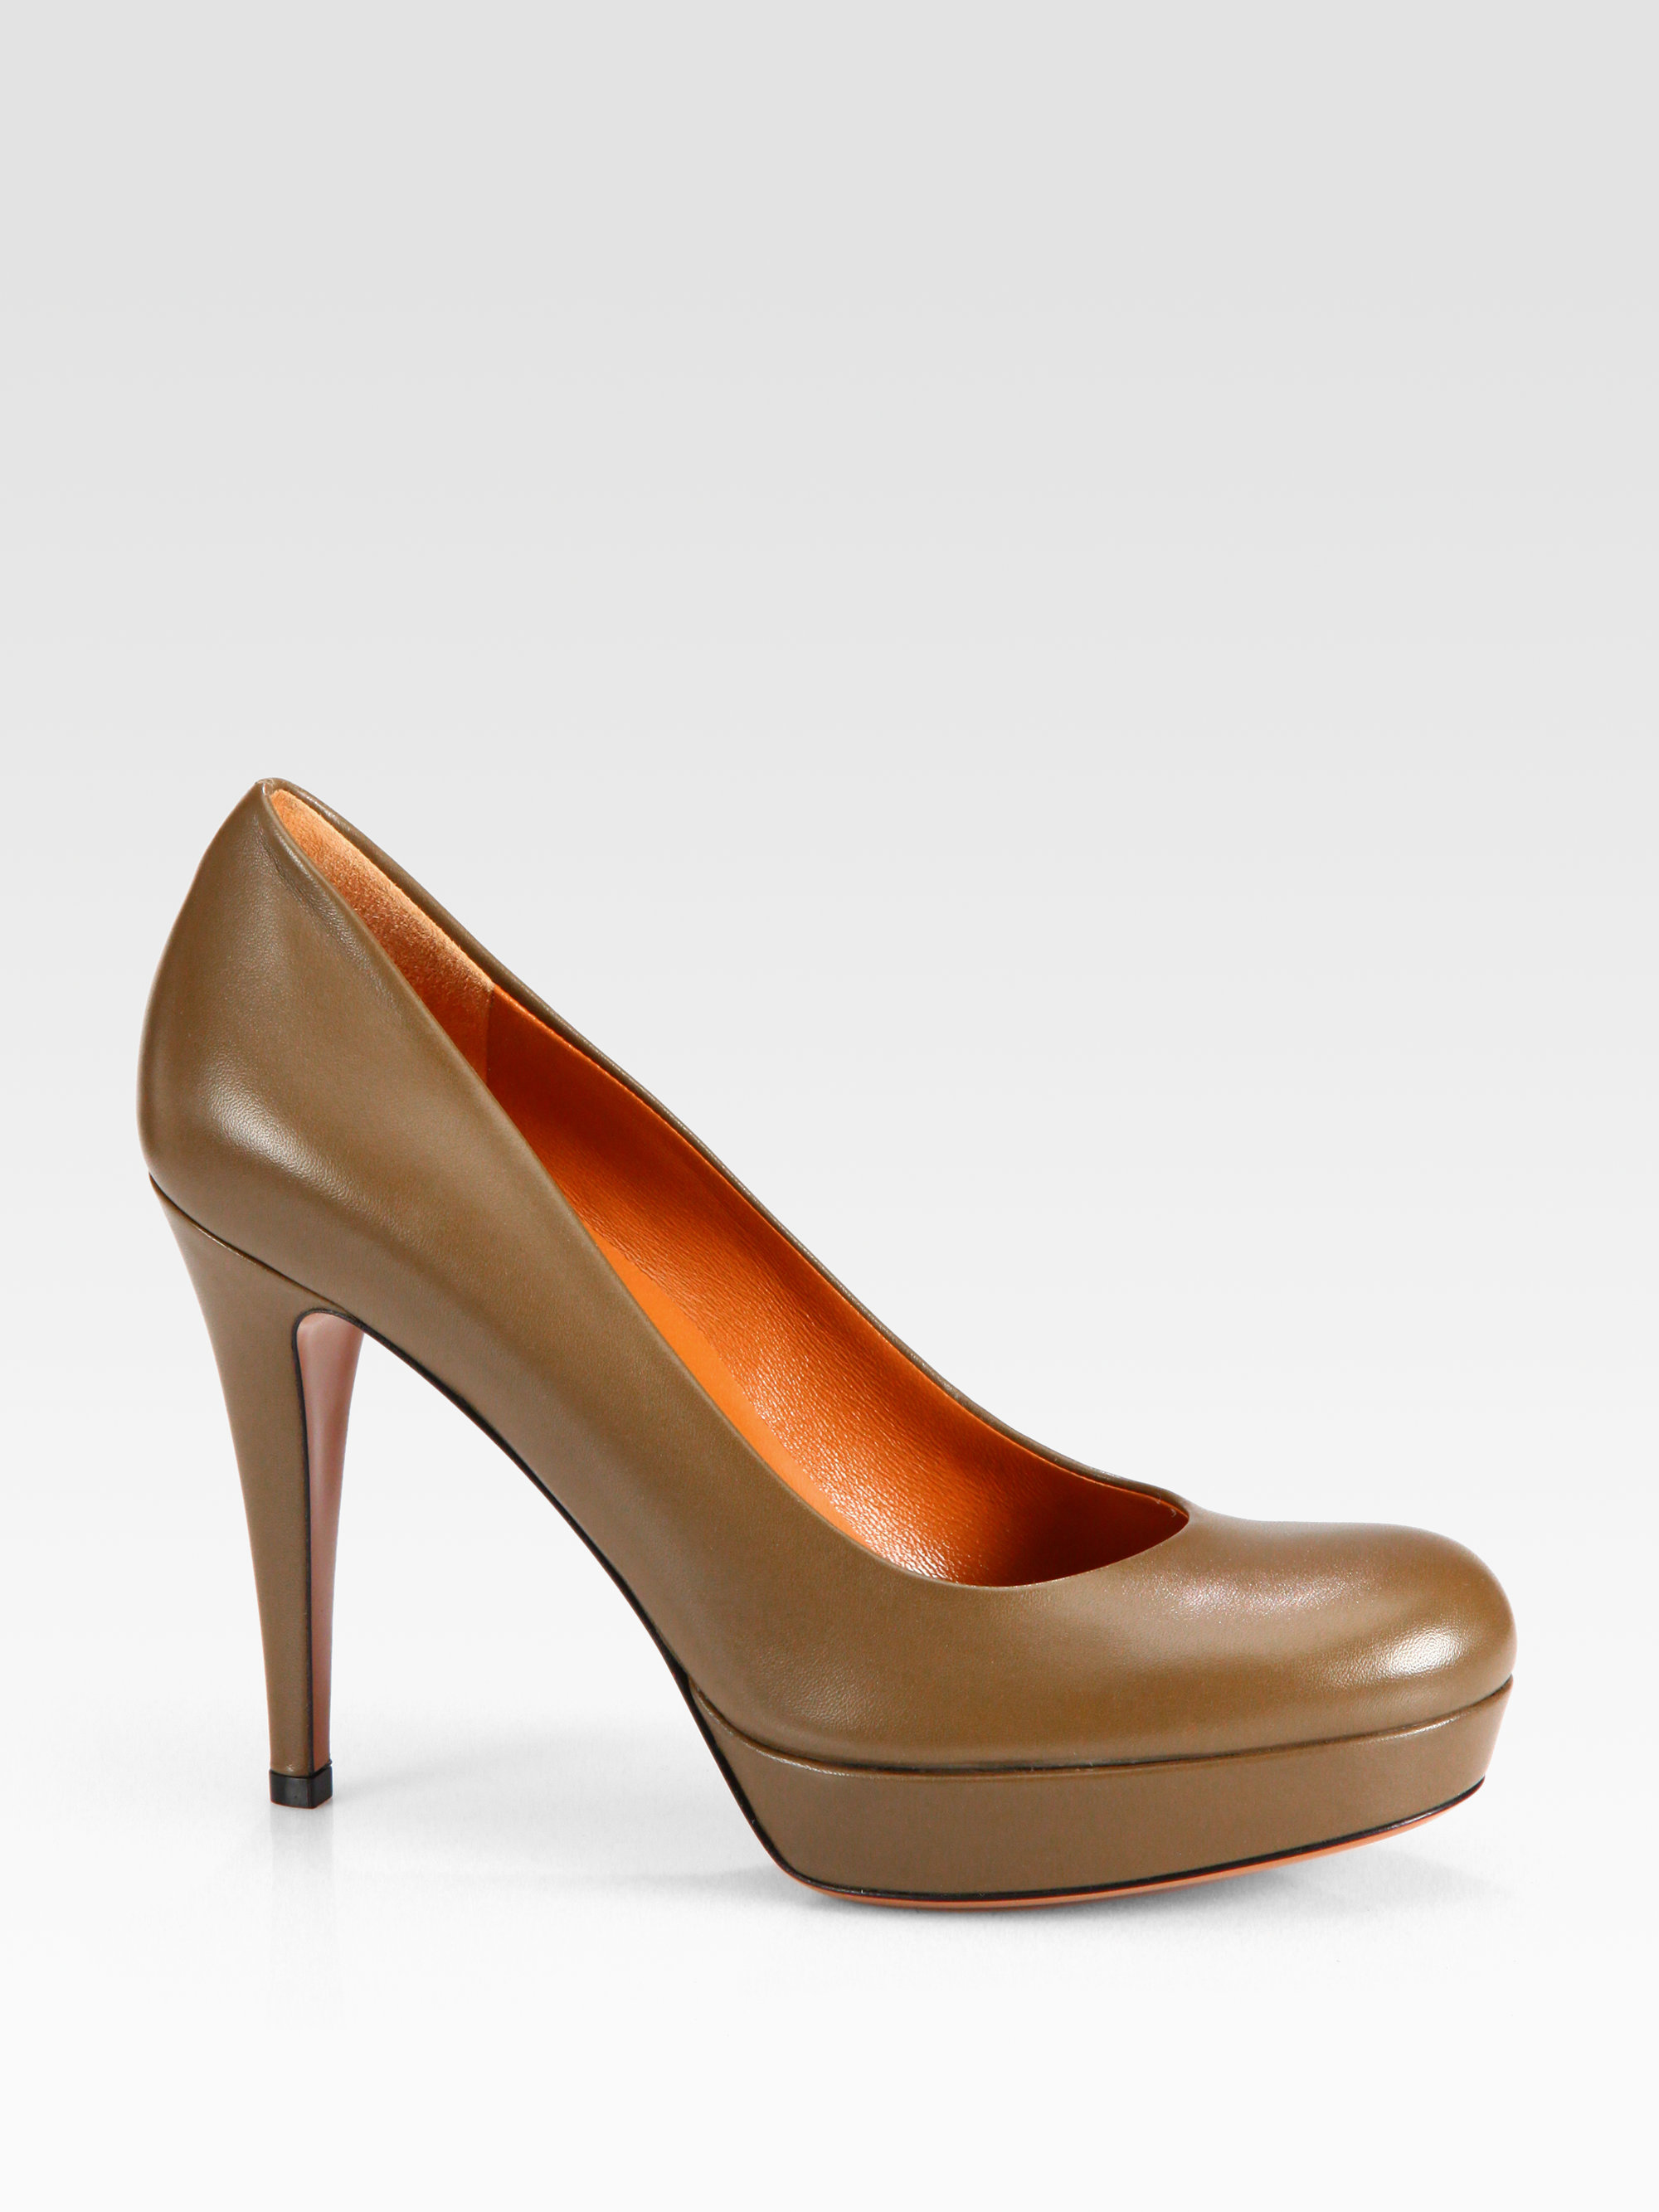 Gucci Tan Nude Betty Leather Round Toe Pumps Heels 